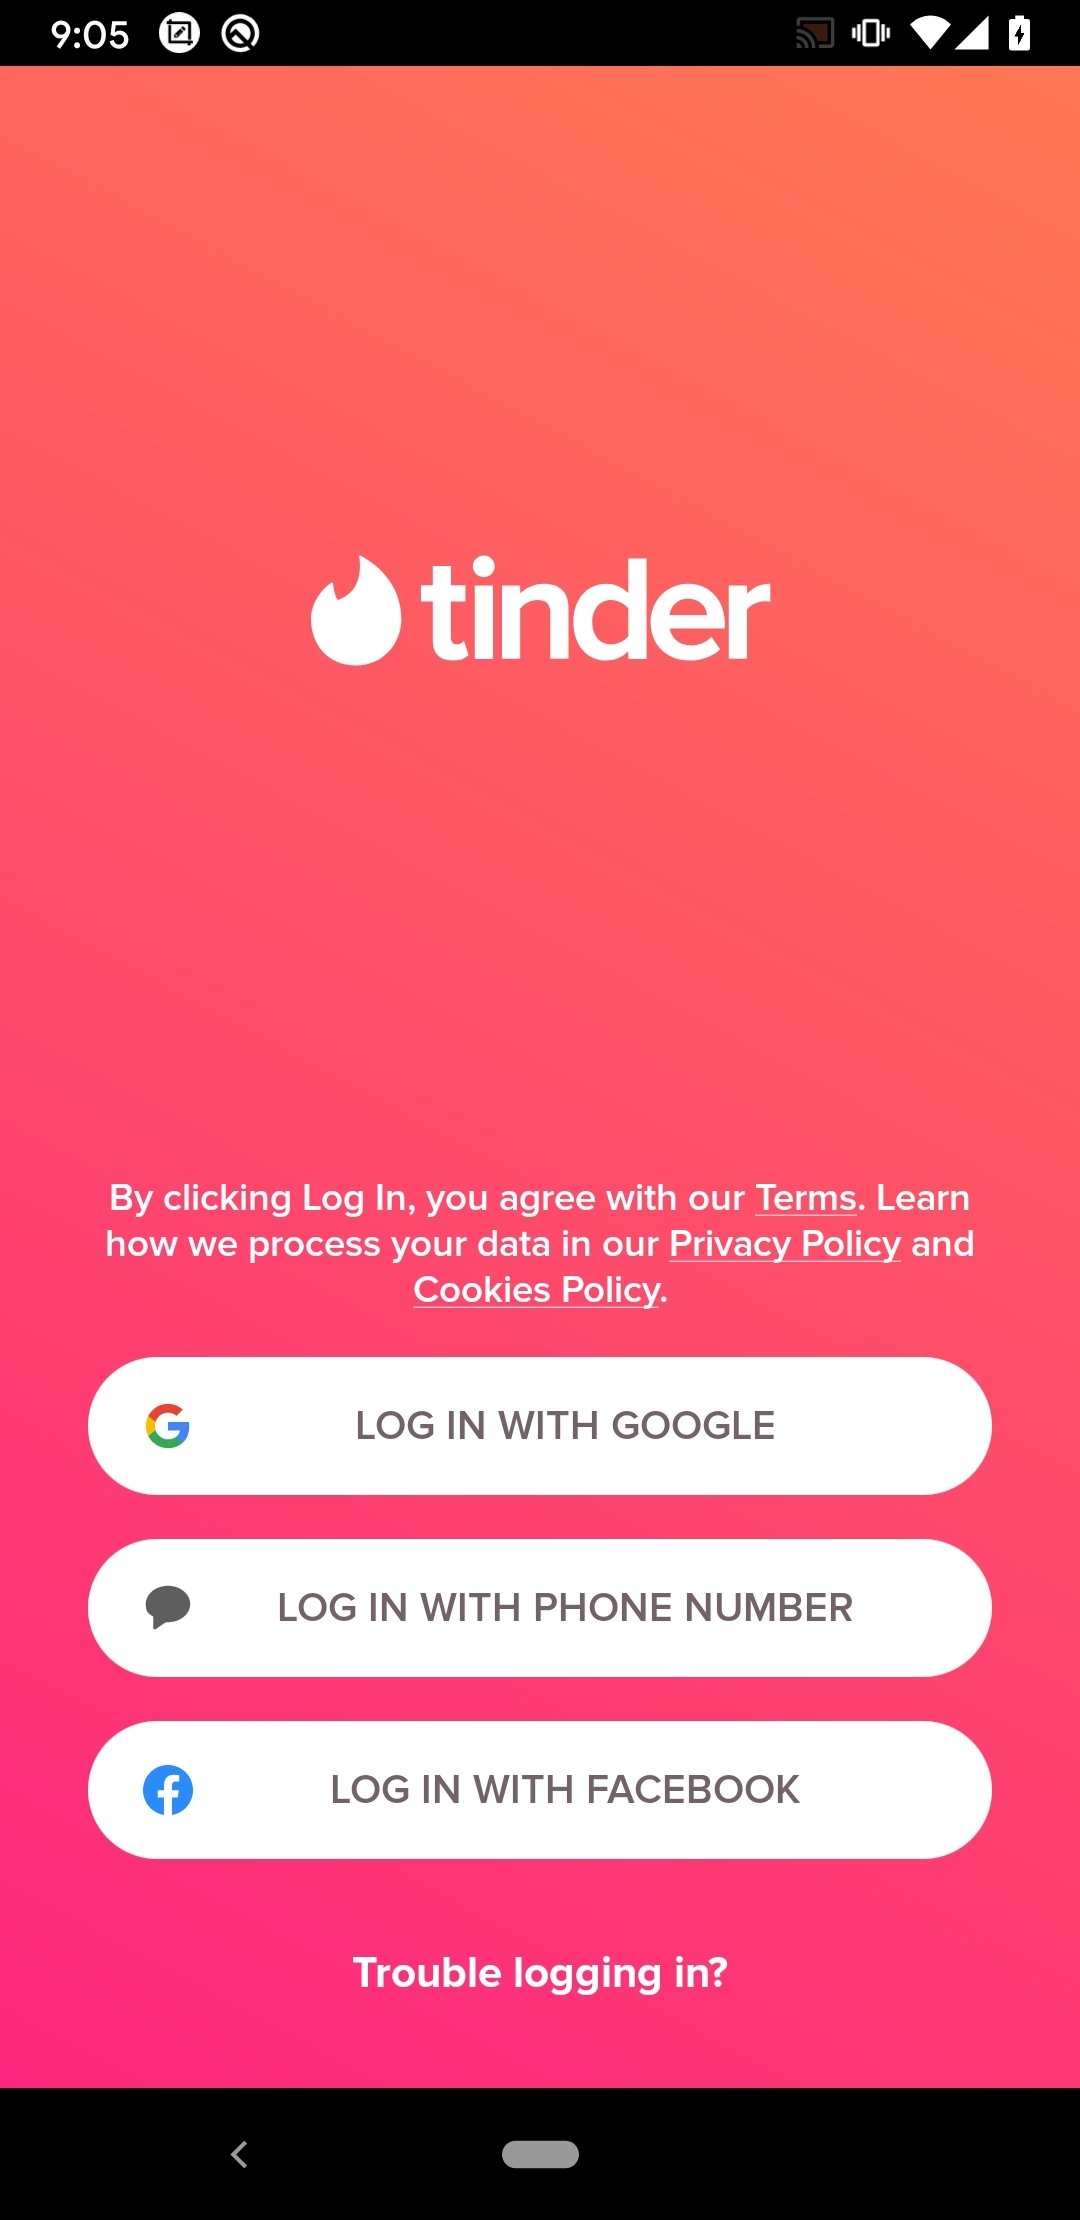 Tinder not on play store